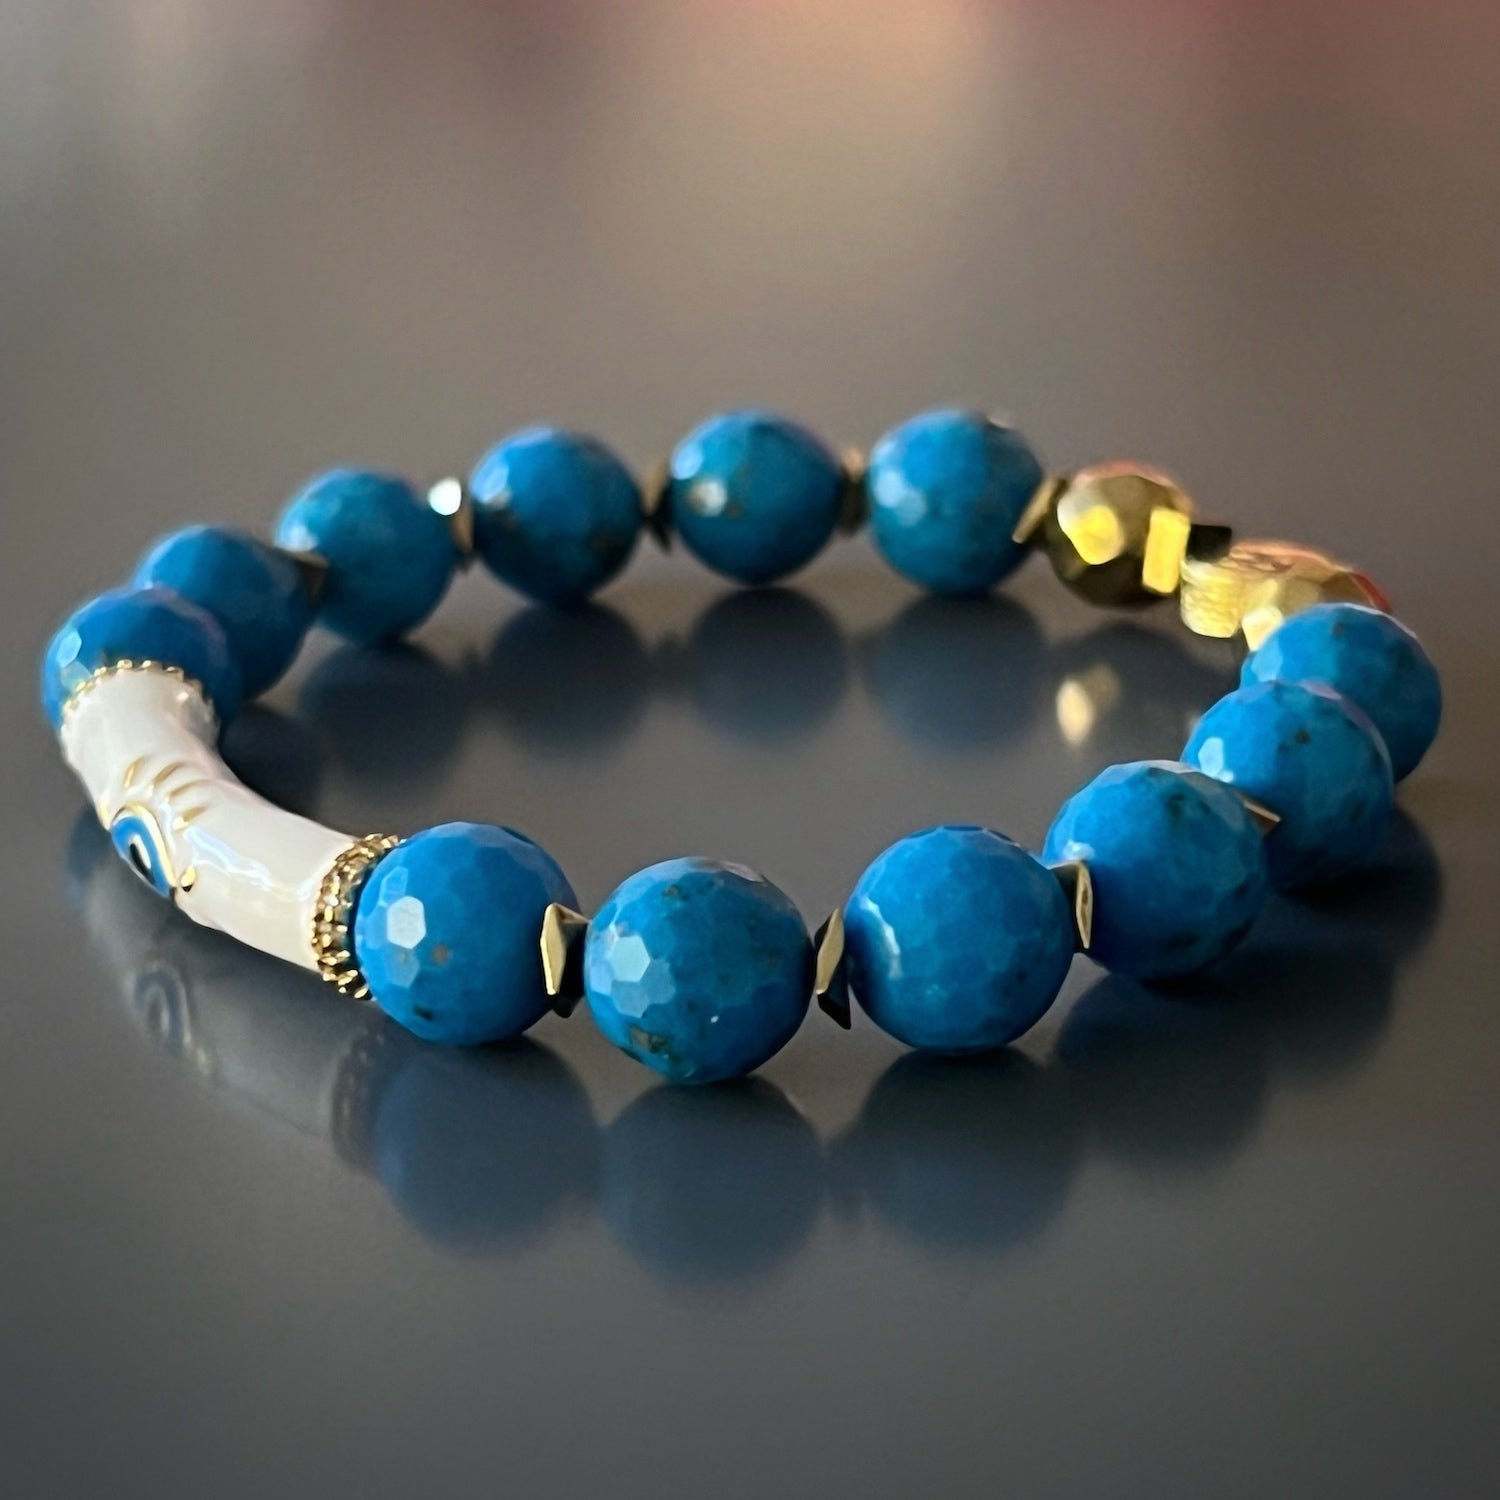 Find your balance and inner calm with the Turquoise Inner Calm Bracelet, a beautifully crafted piece with special faceted turquoise stones.